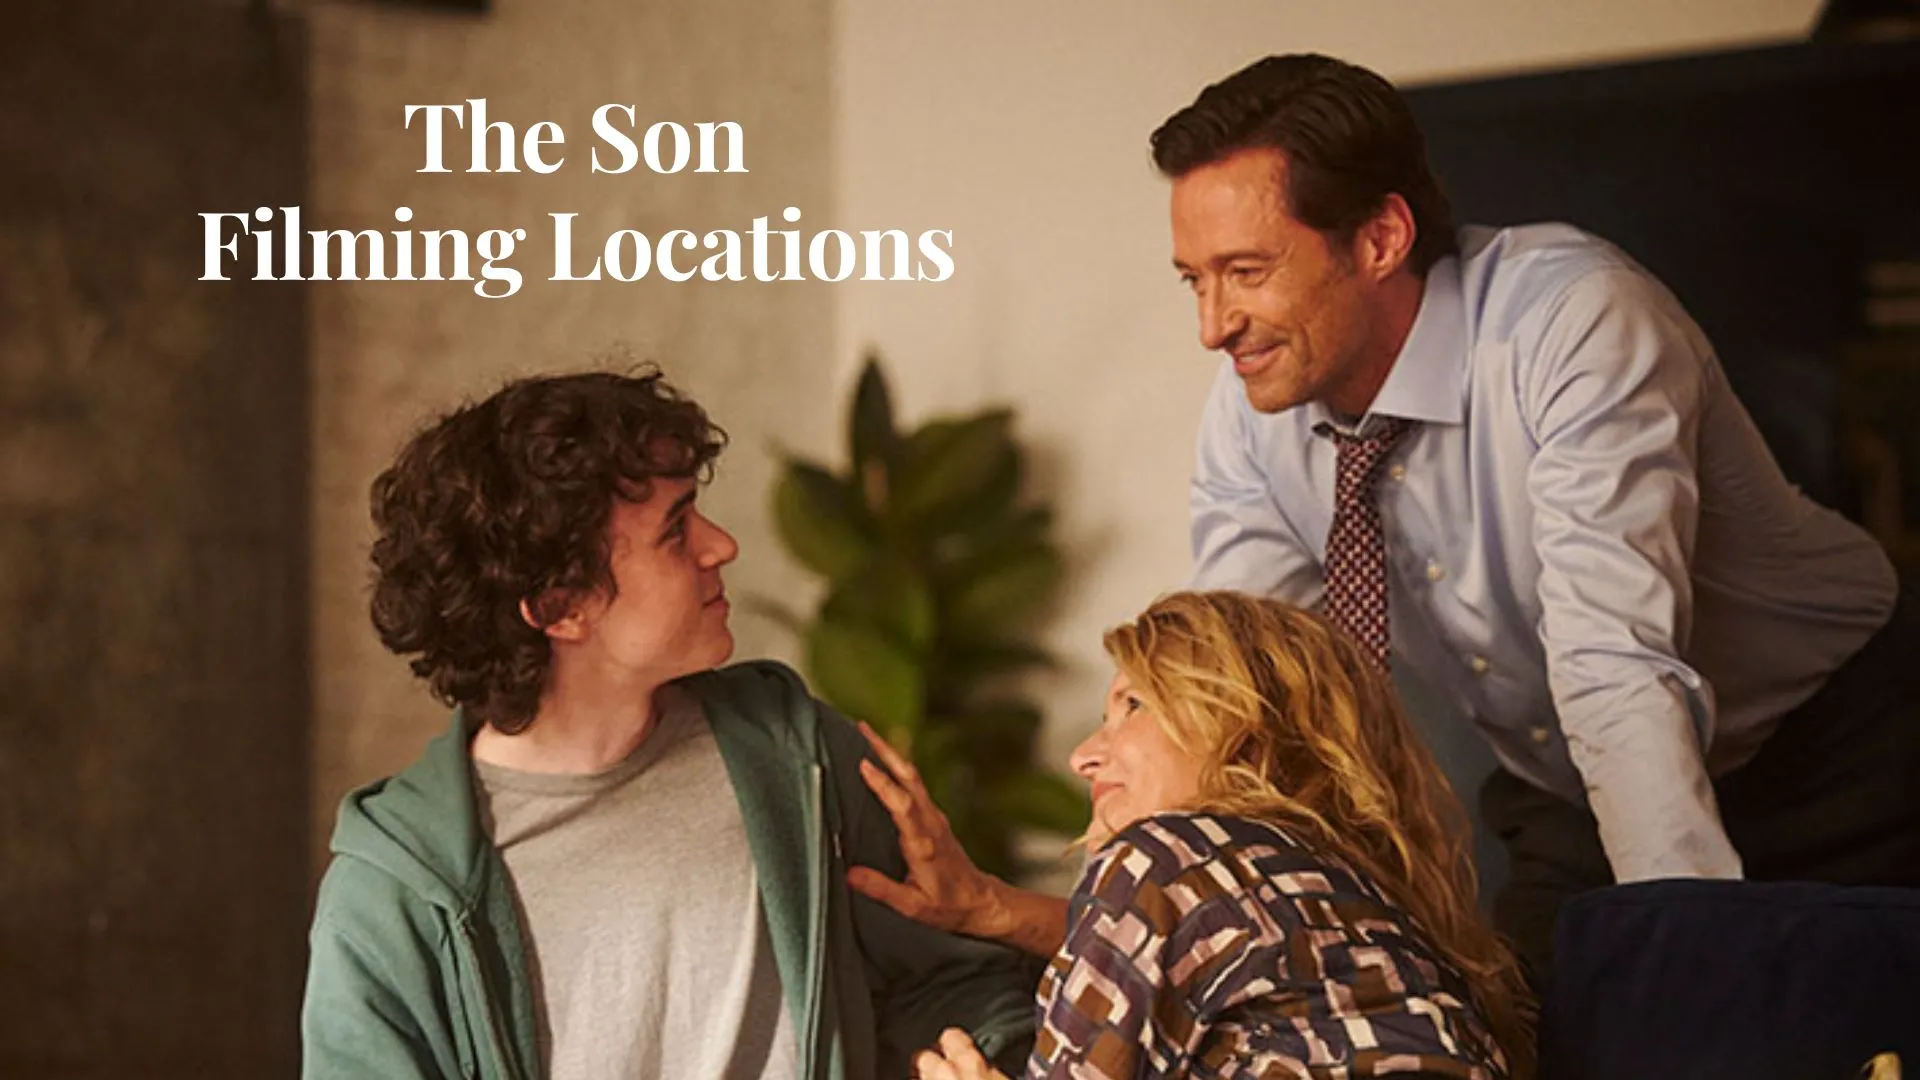 The Son Filming Locations